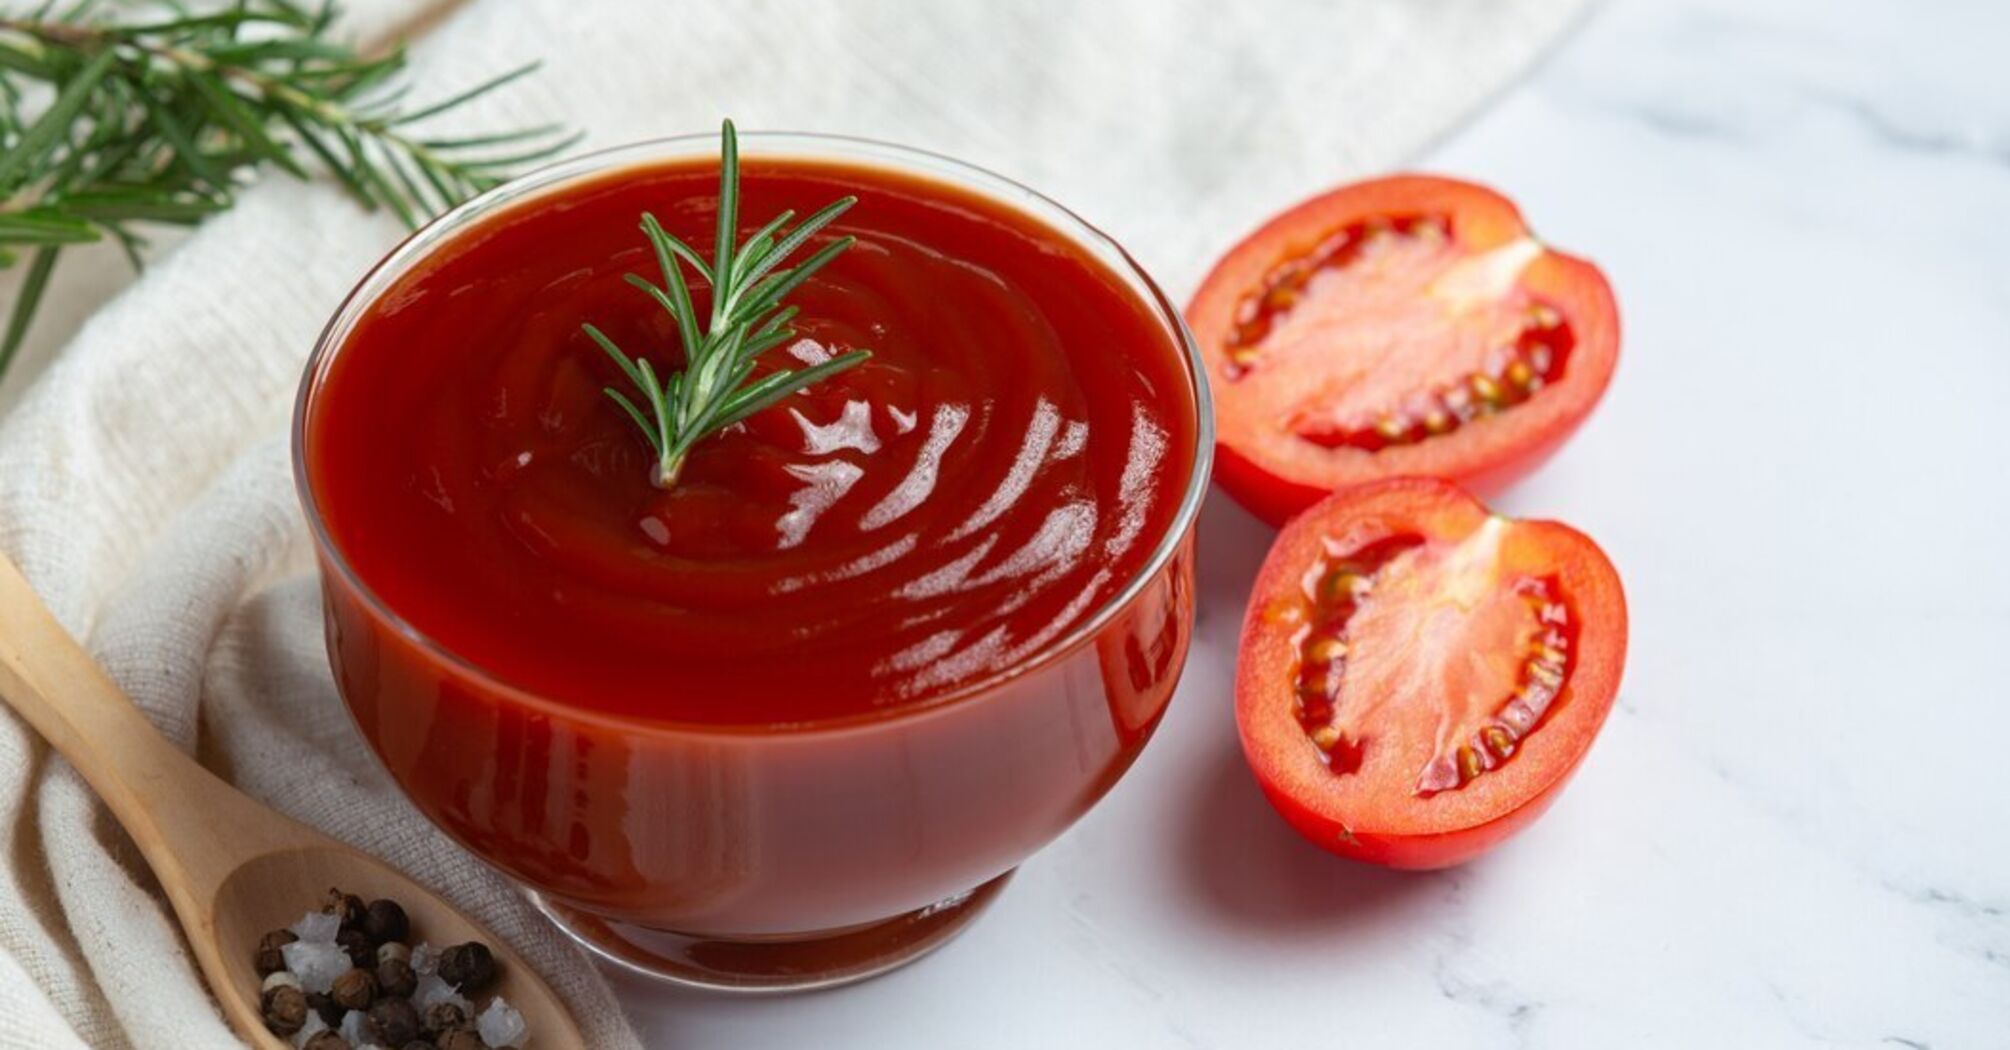 Homemade vinegar-free ketchup that can be frozen: how to make it